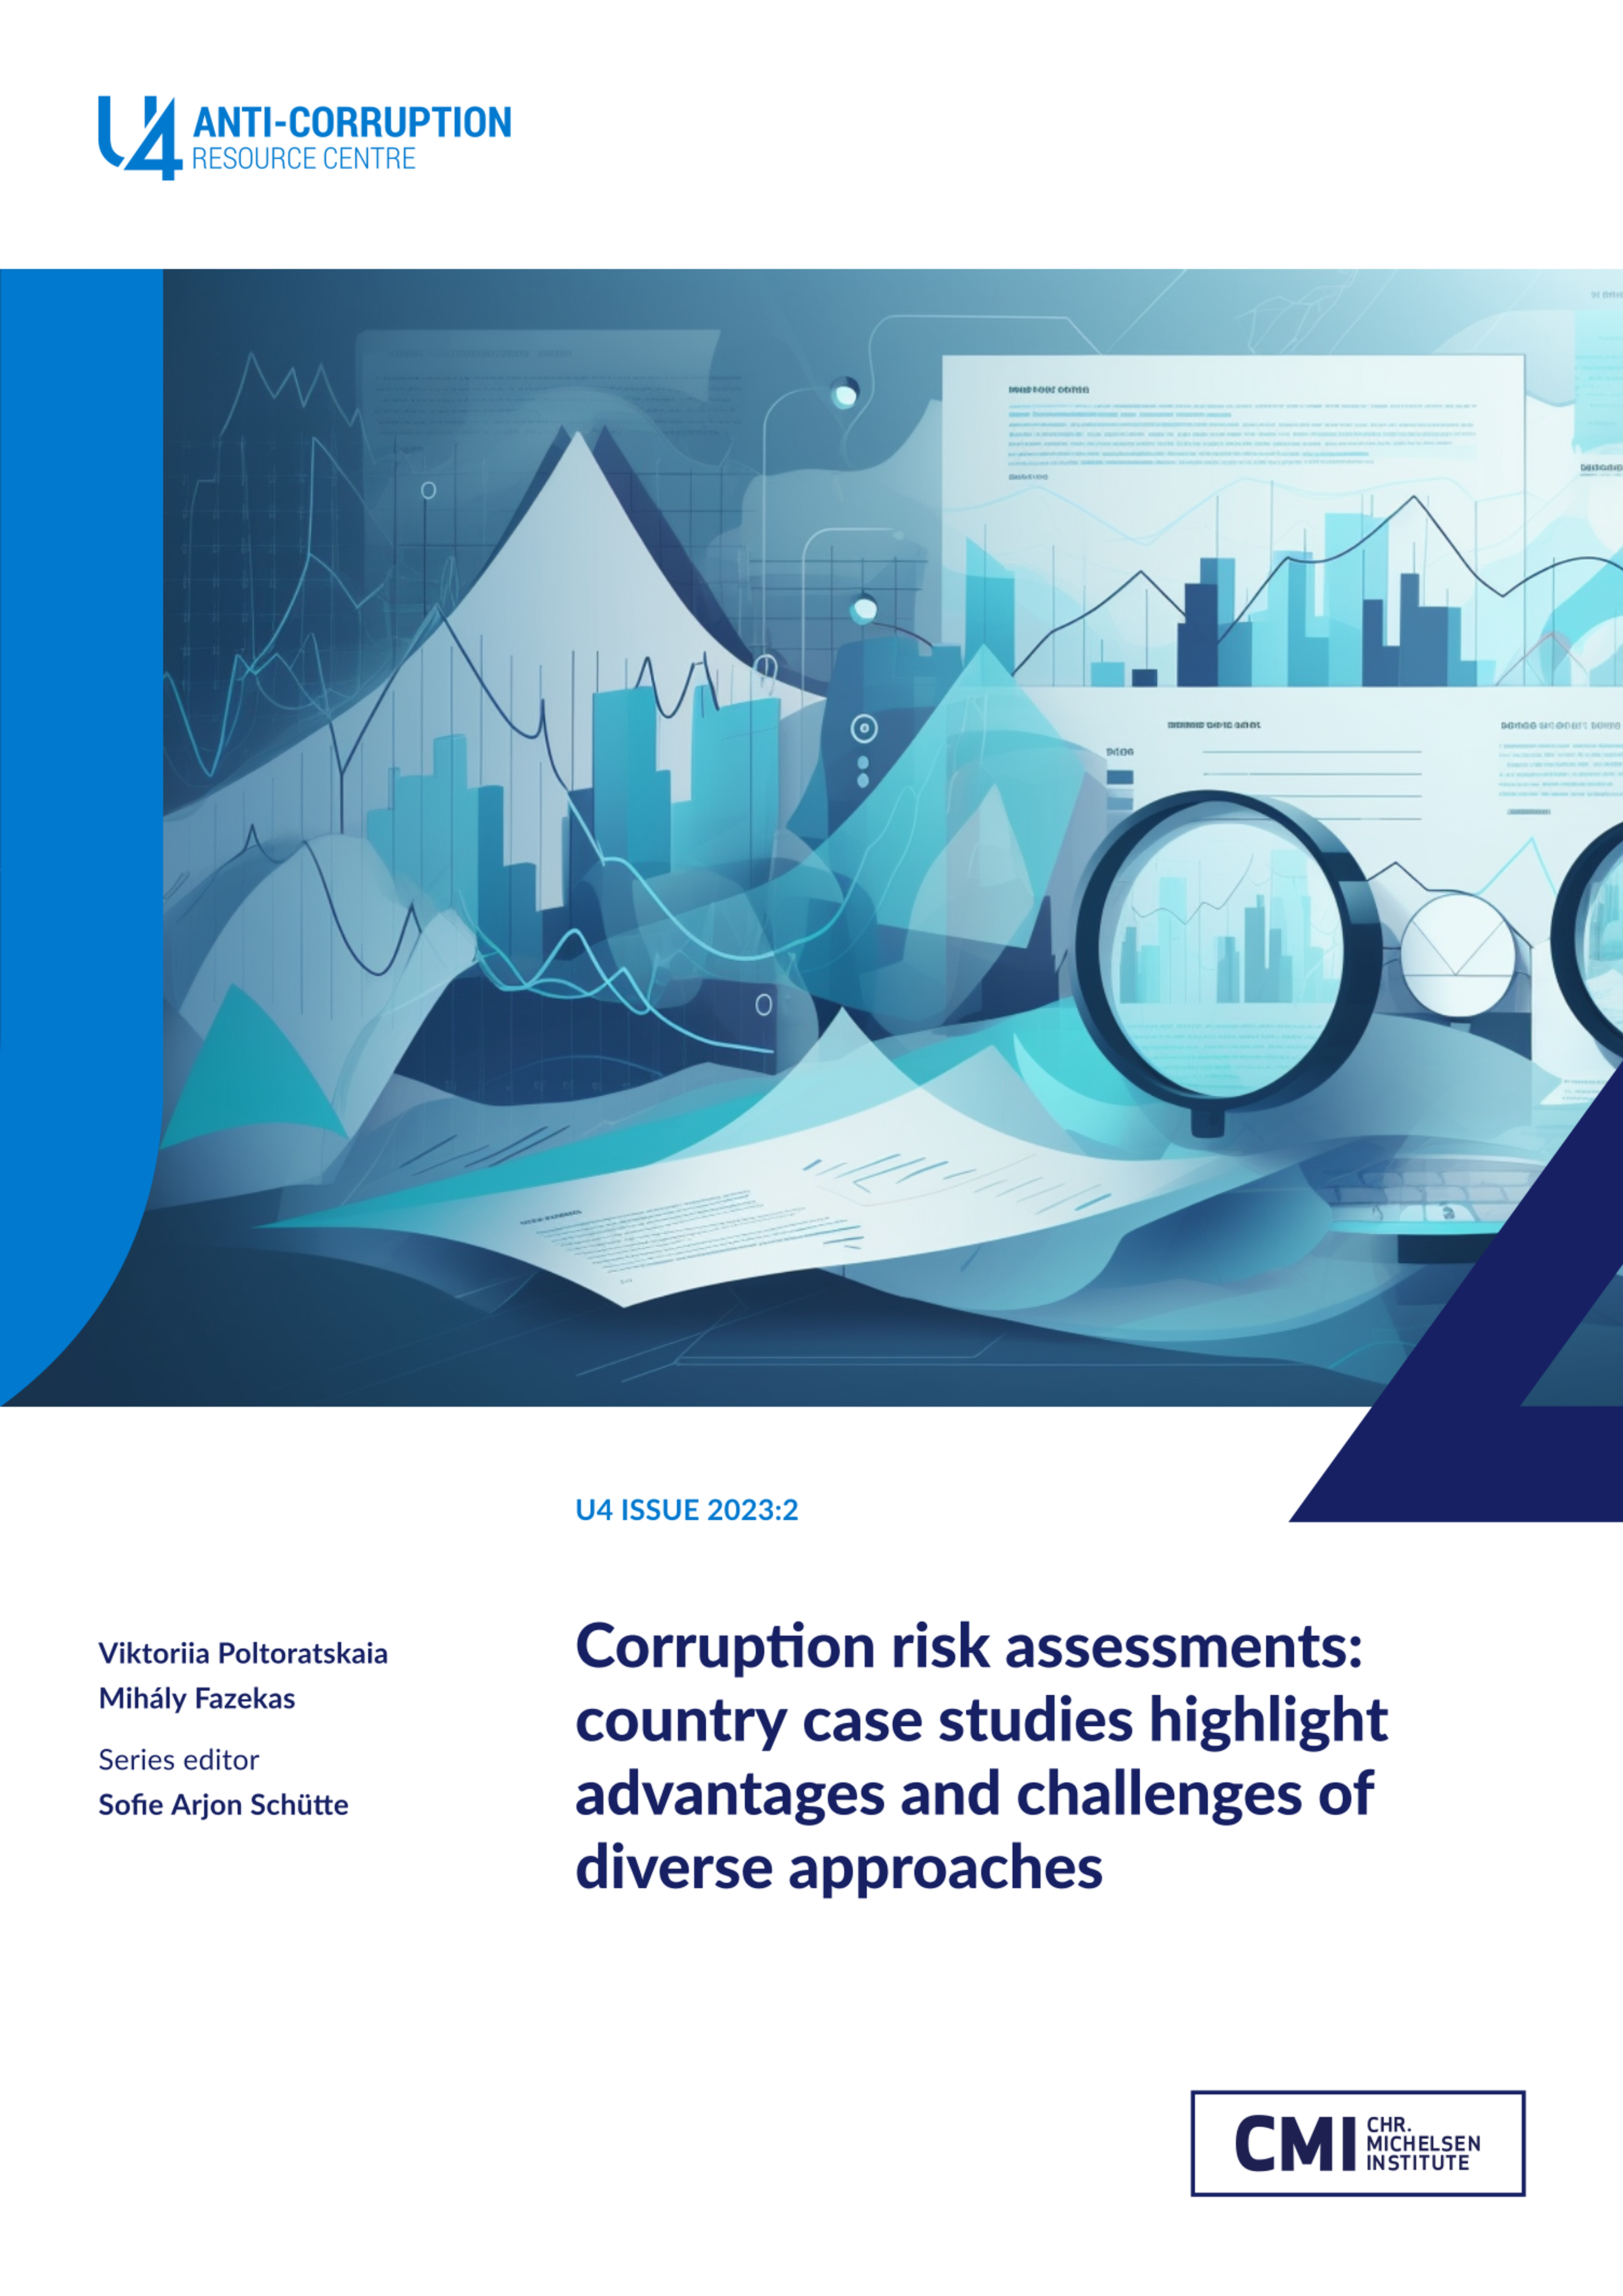 Corruption risk assessments: country case studies highlight advantages and challenges of diverse approaches